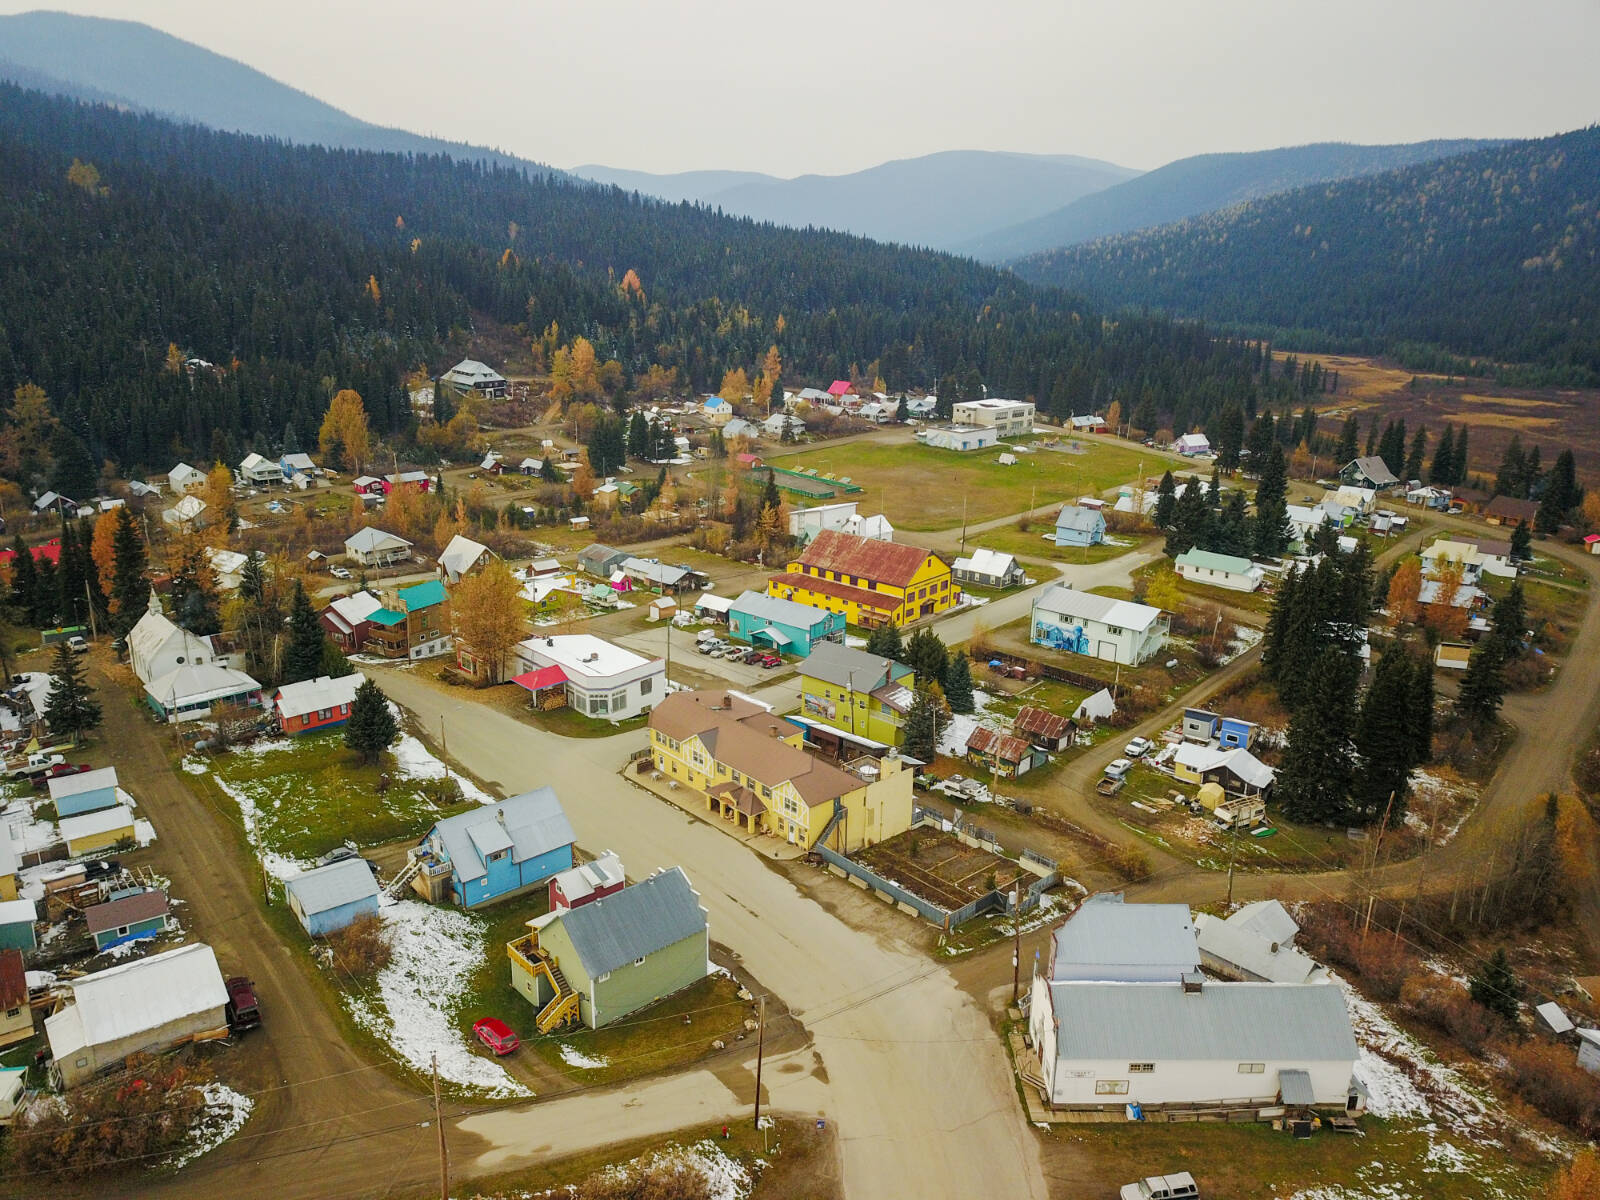 A look at the colourful buildings of Wells, near Barkerville in the Cariboo. Photo courtesy Explore Cariboo